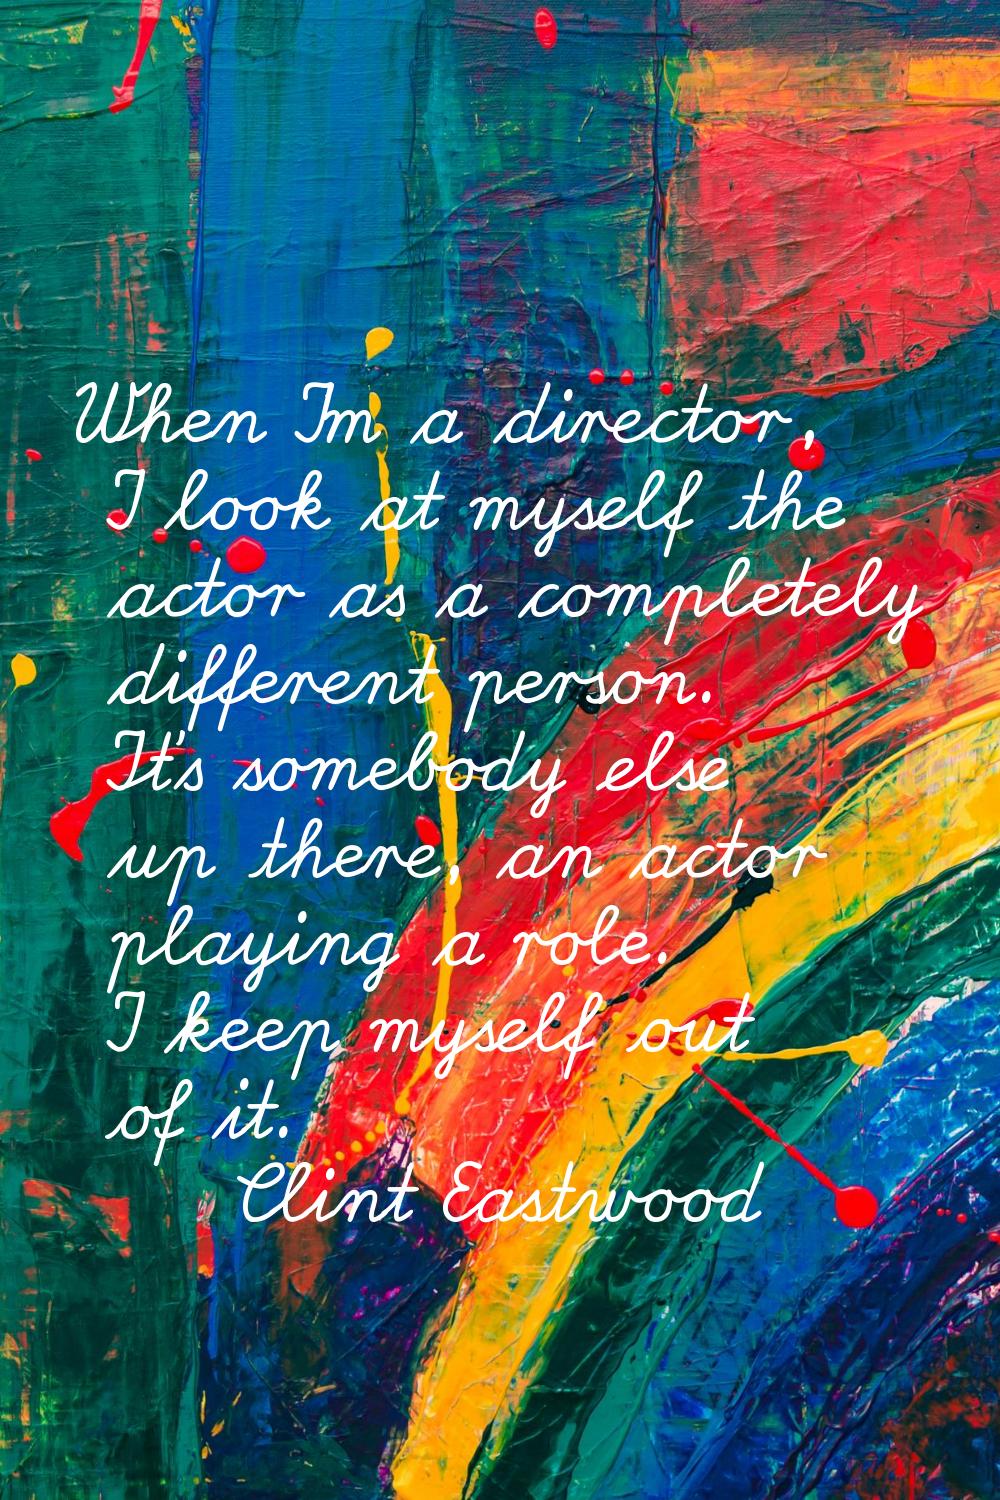 When I'm a director, I look at myself the actor as a completely different person. It's somebody els